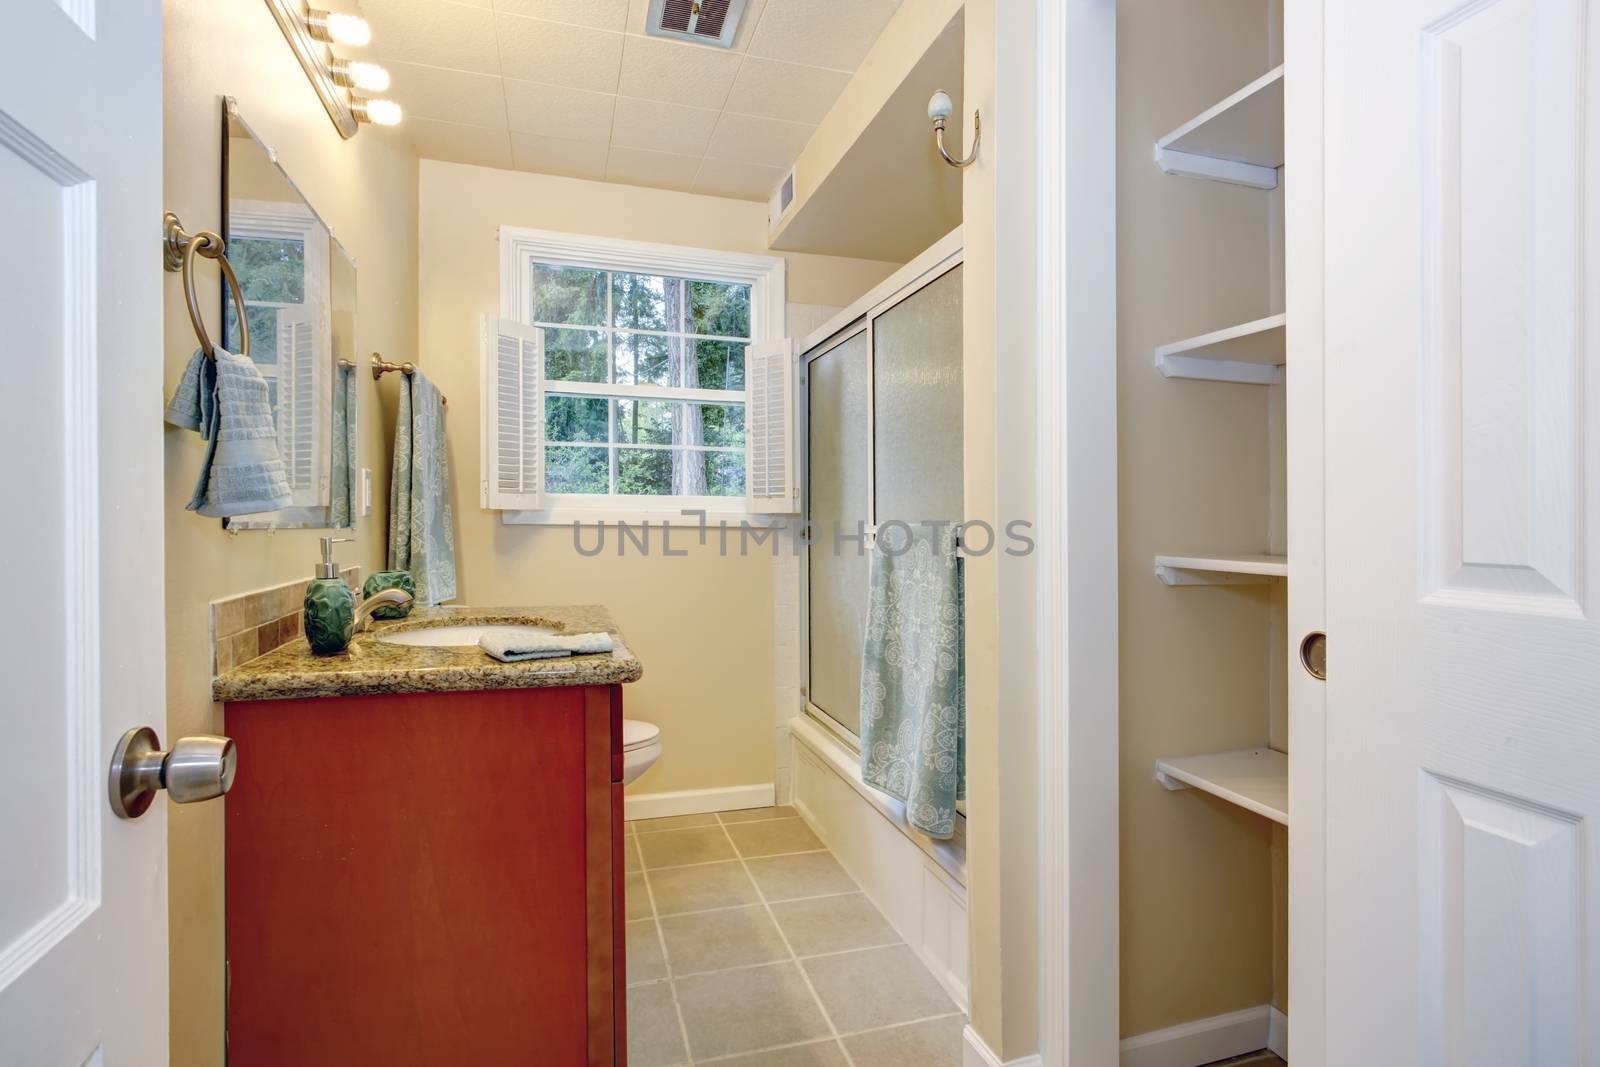 Light tones bathroom with french window. View of washbasin cabinet, bath tub with glass door and built-in shelves